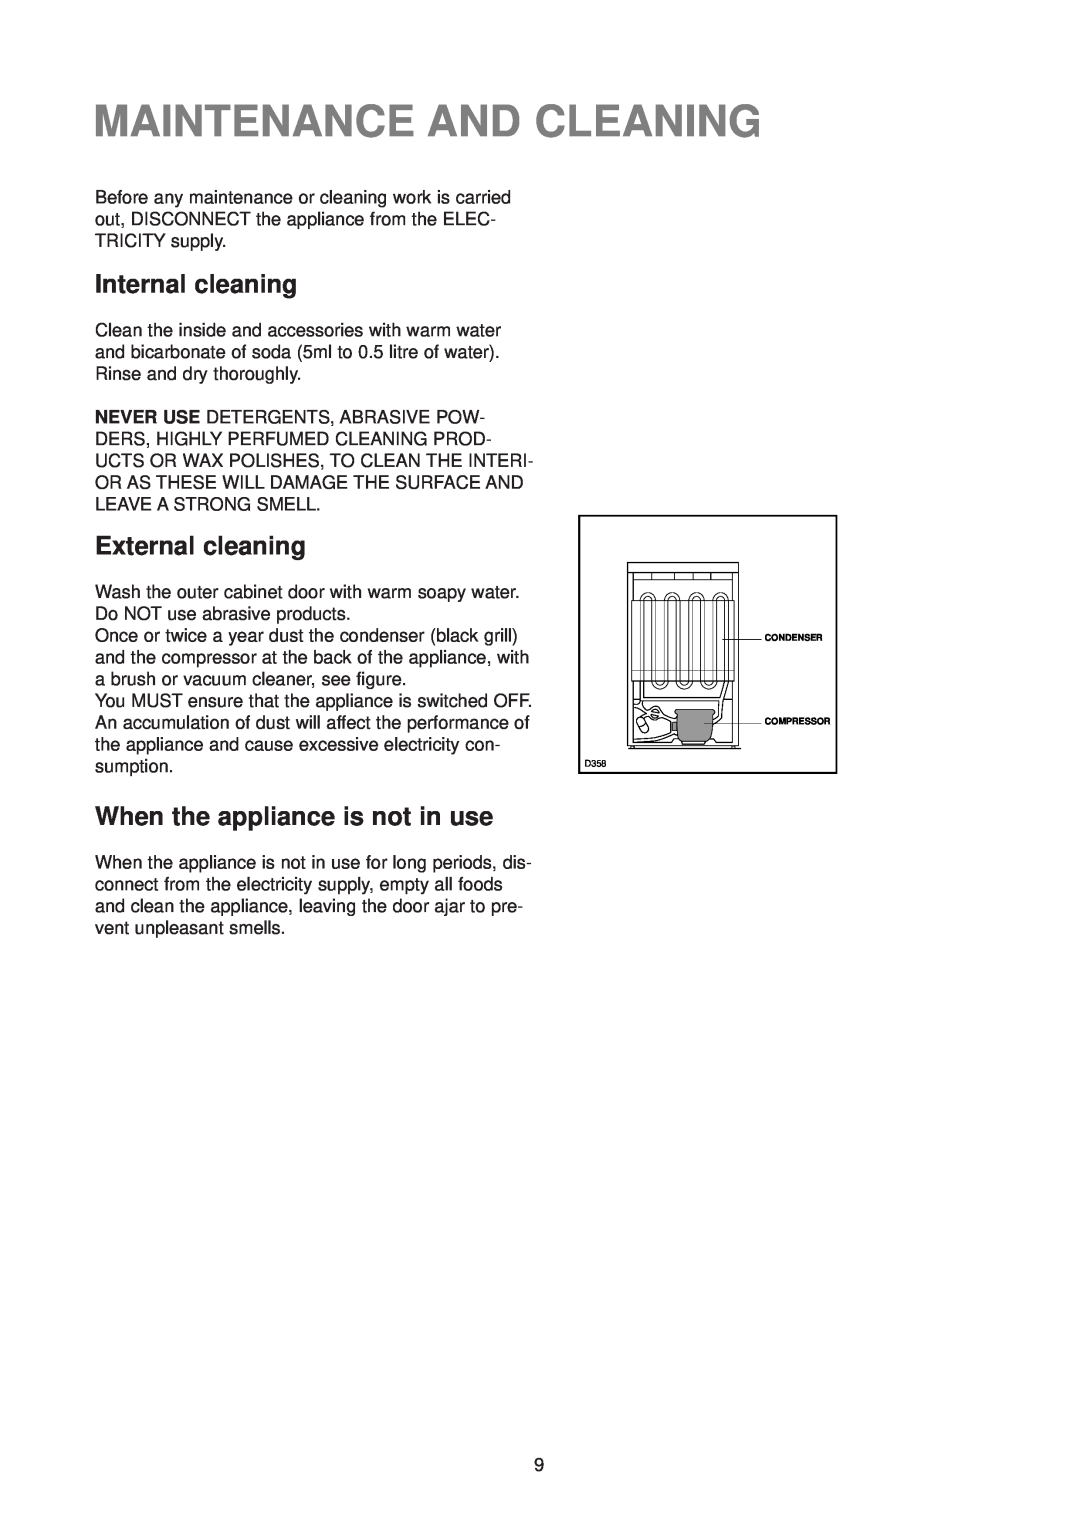 Zanussi ZV 40 R manual Maintenance And Cleaning, Internal cleaning, External cleaning, When the appliance is not in use 